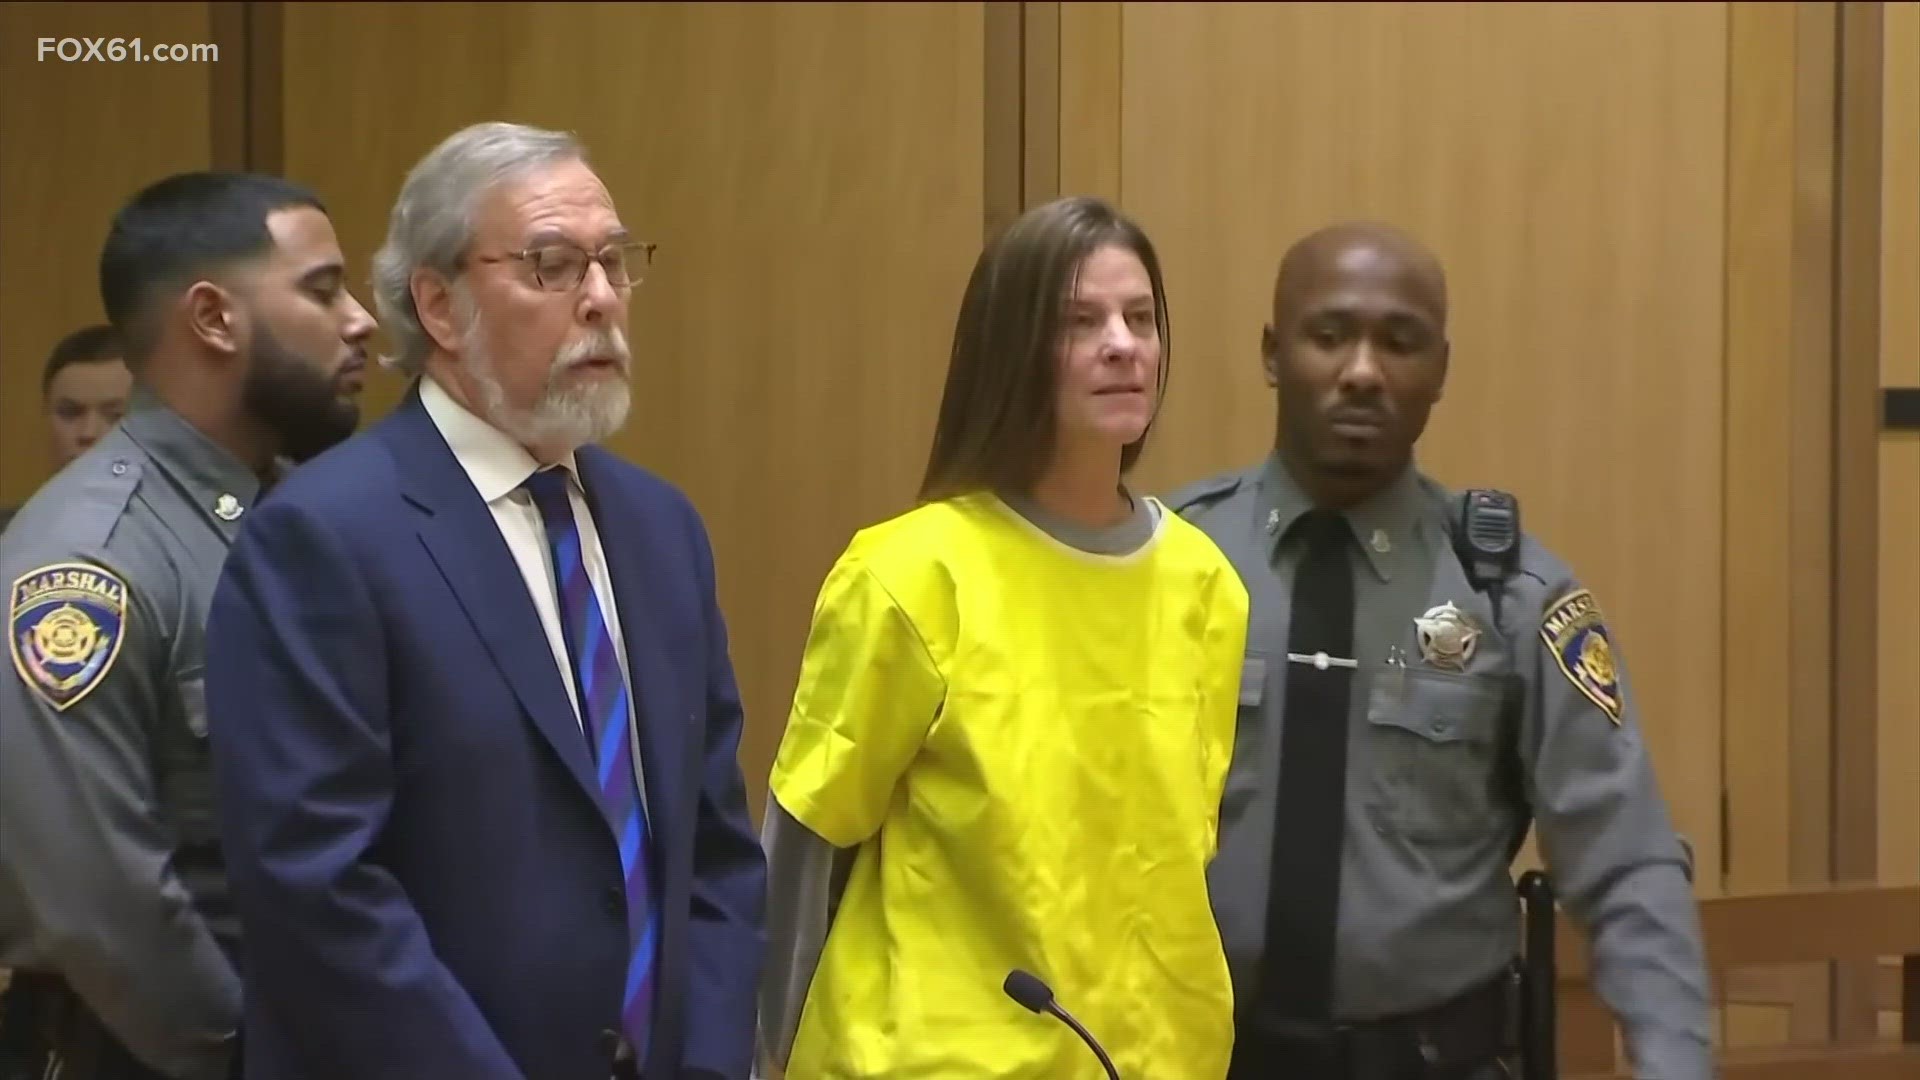 Troconis is facing several charges in connection with the disappearance of Jennifer Dulos, who has been missing for over four years.